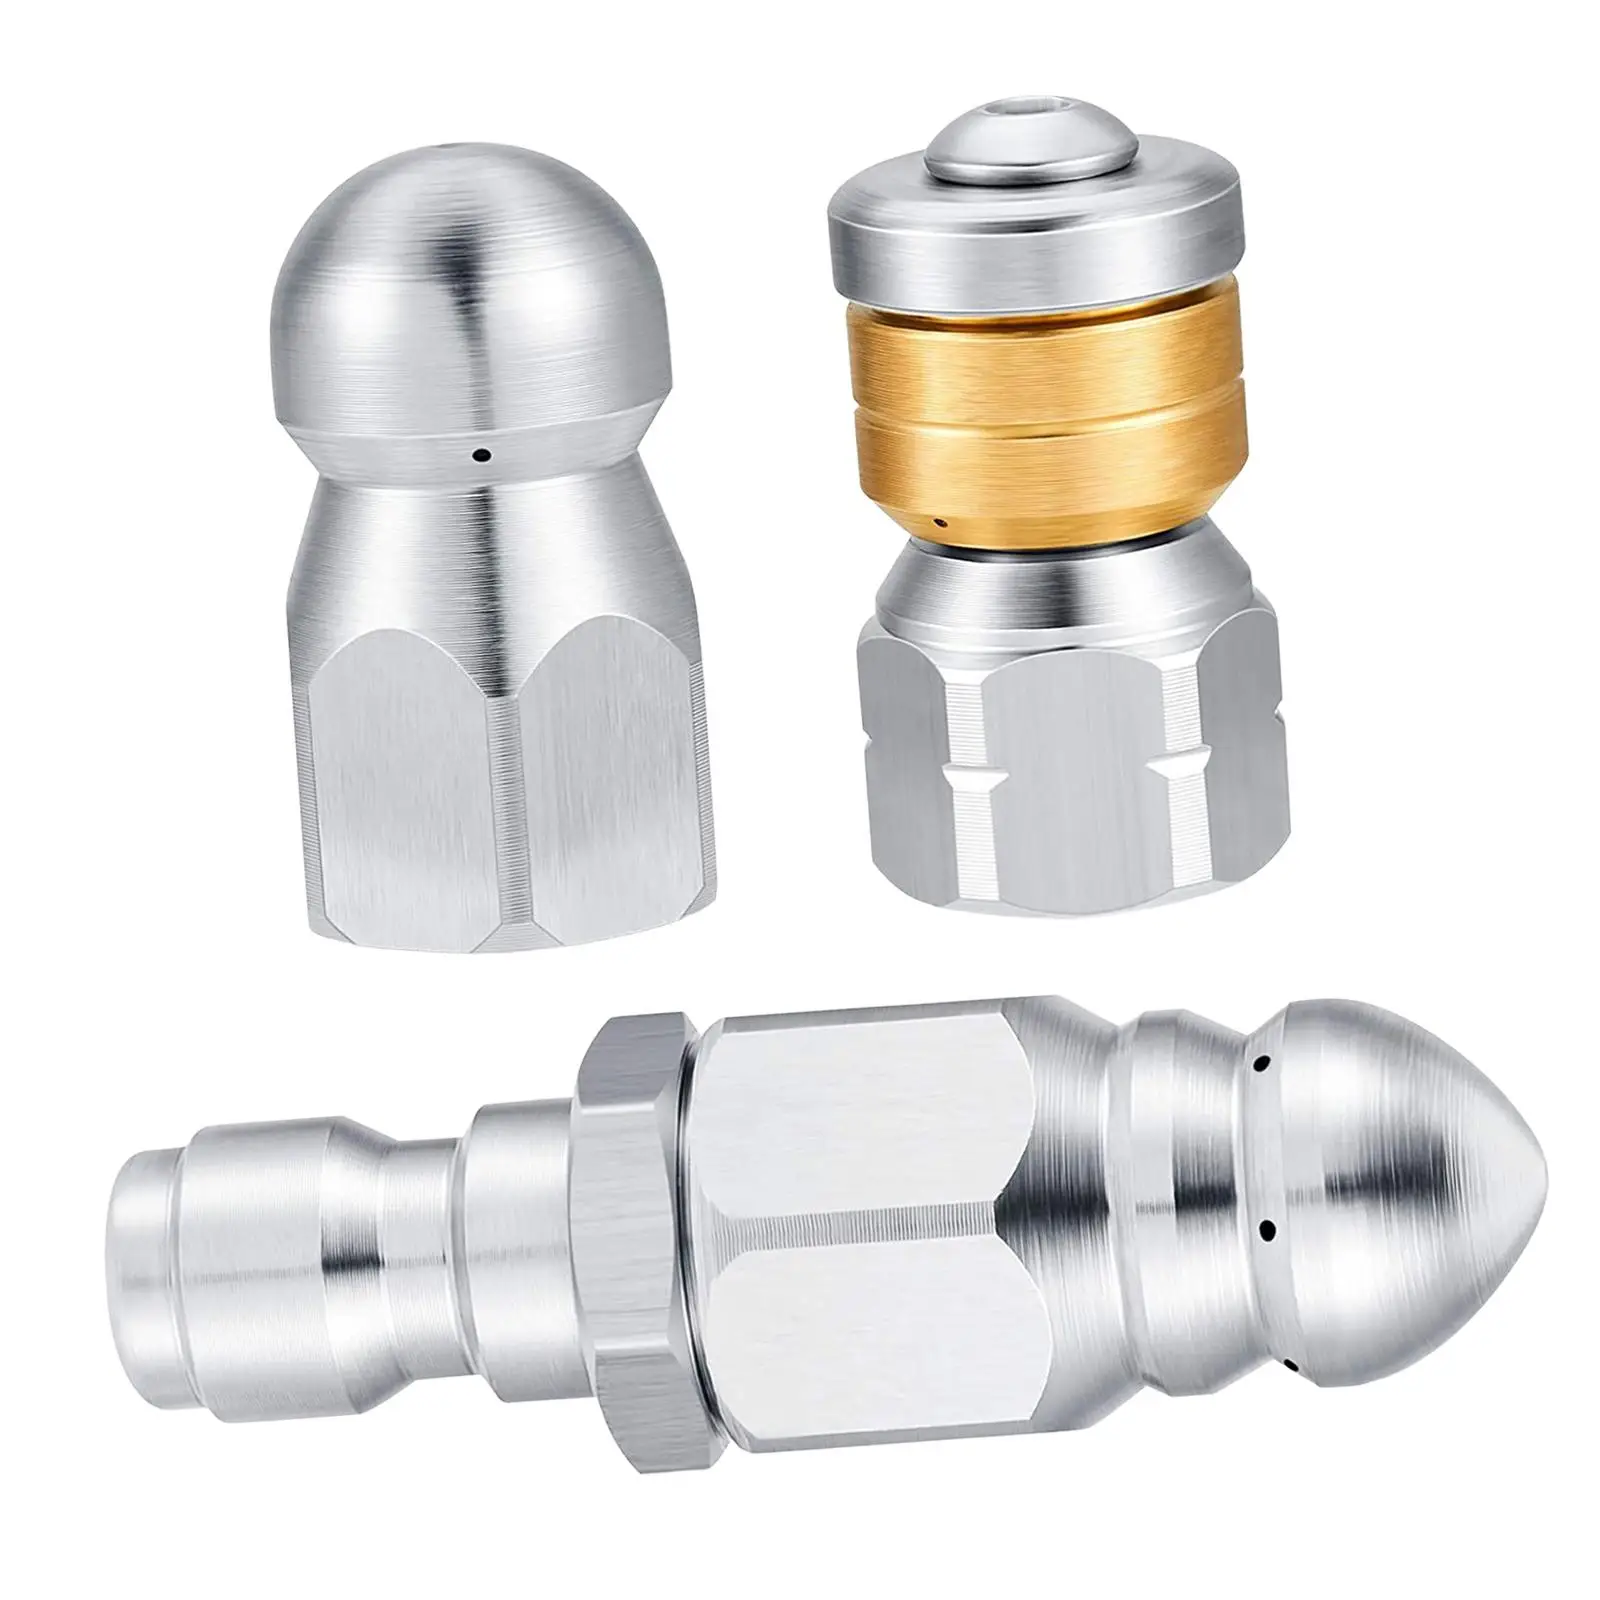 3Pcs Sewer Jetter Nozzle Stainless Steel Rotating Button Nose Sewer Jetting Nozzle for Pressure Washer Drain Jetting Hose